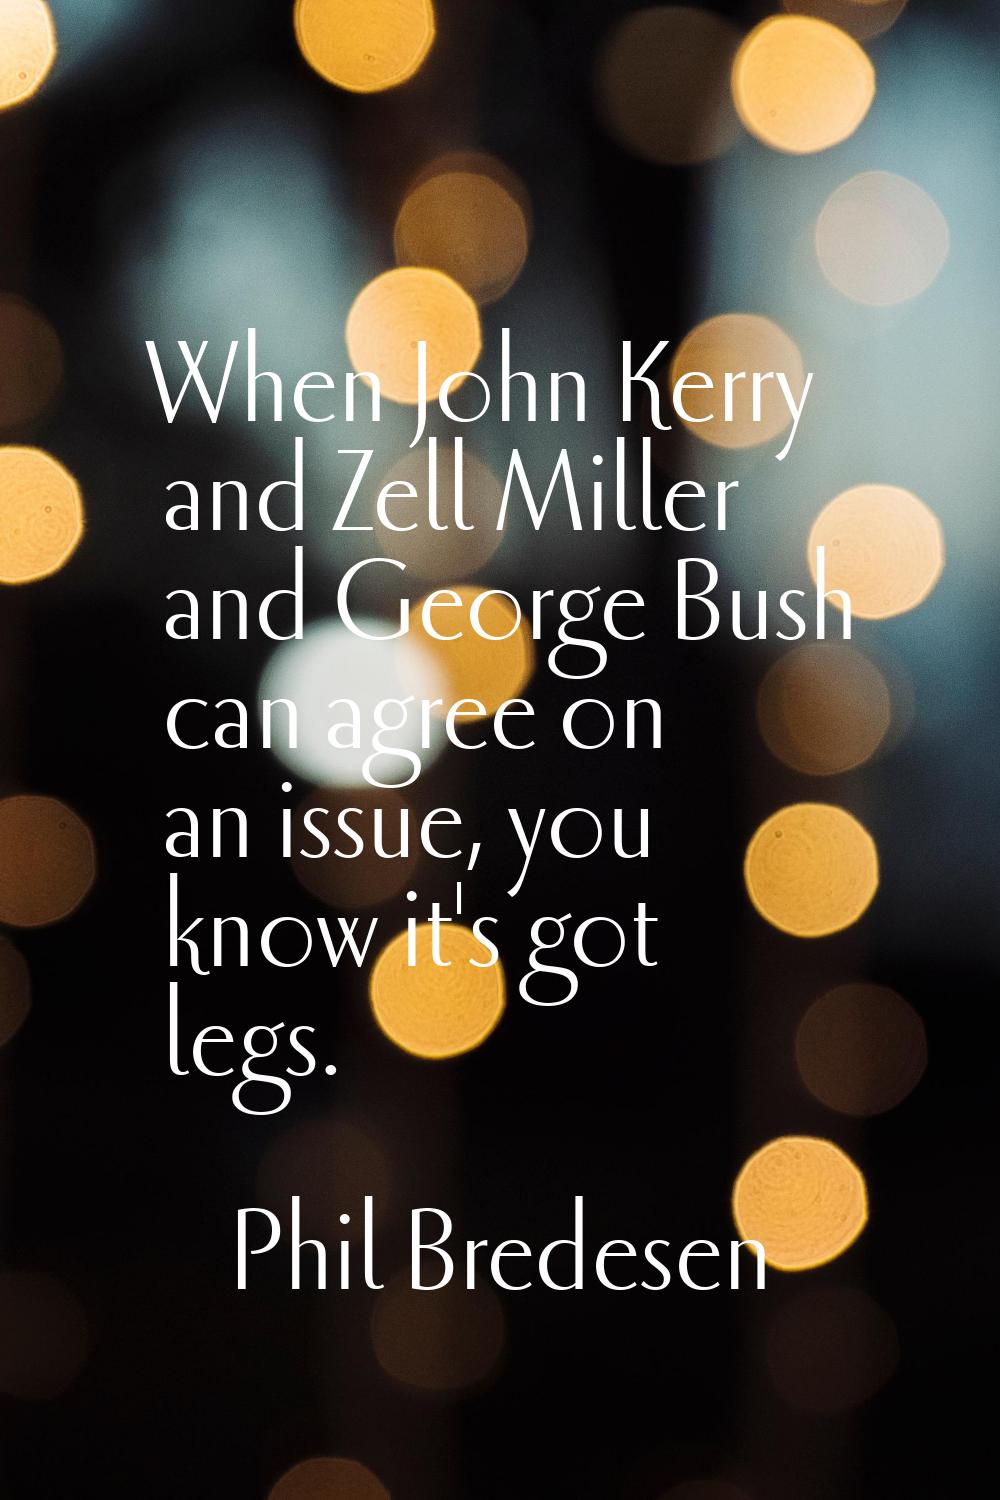 When John Kerry and Zell Miller and George Bush can agree on an issue, you know it's got legs.